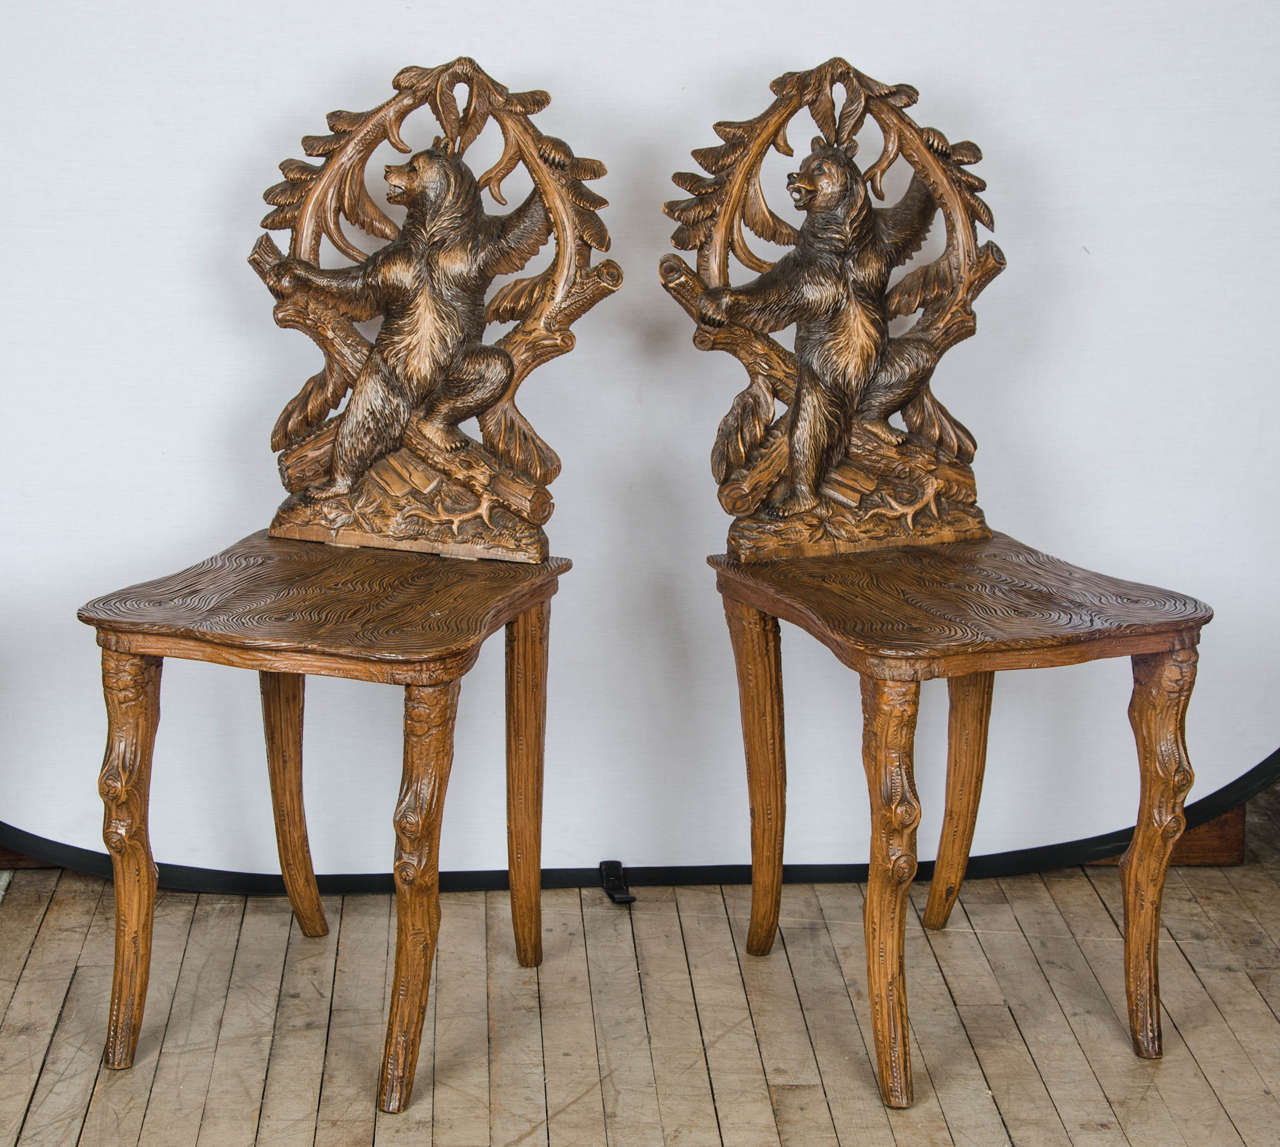 This magnificent 19th C. set of 8 black forest side chairs depicting a bear climbing have been superbly hand carved. The chairs stand on roughly carved legs with knotted ‘knee’ joints. Each chair measures approximately 17 in – 43 cm wide, 17 ½ in –